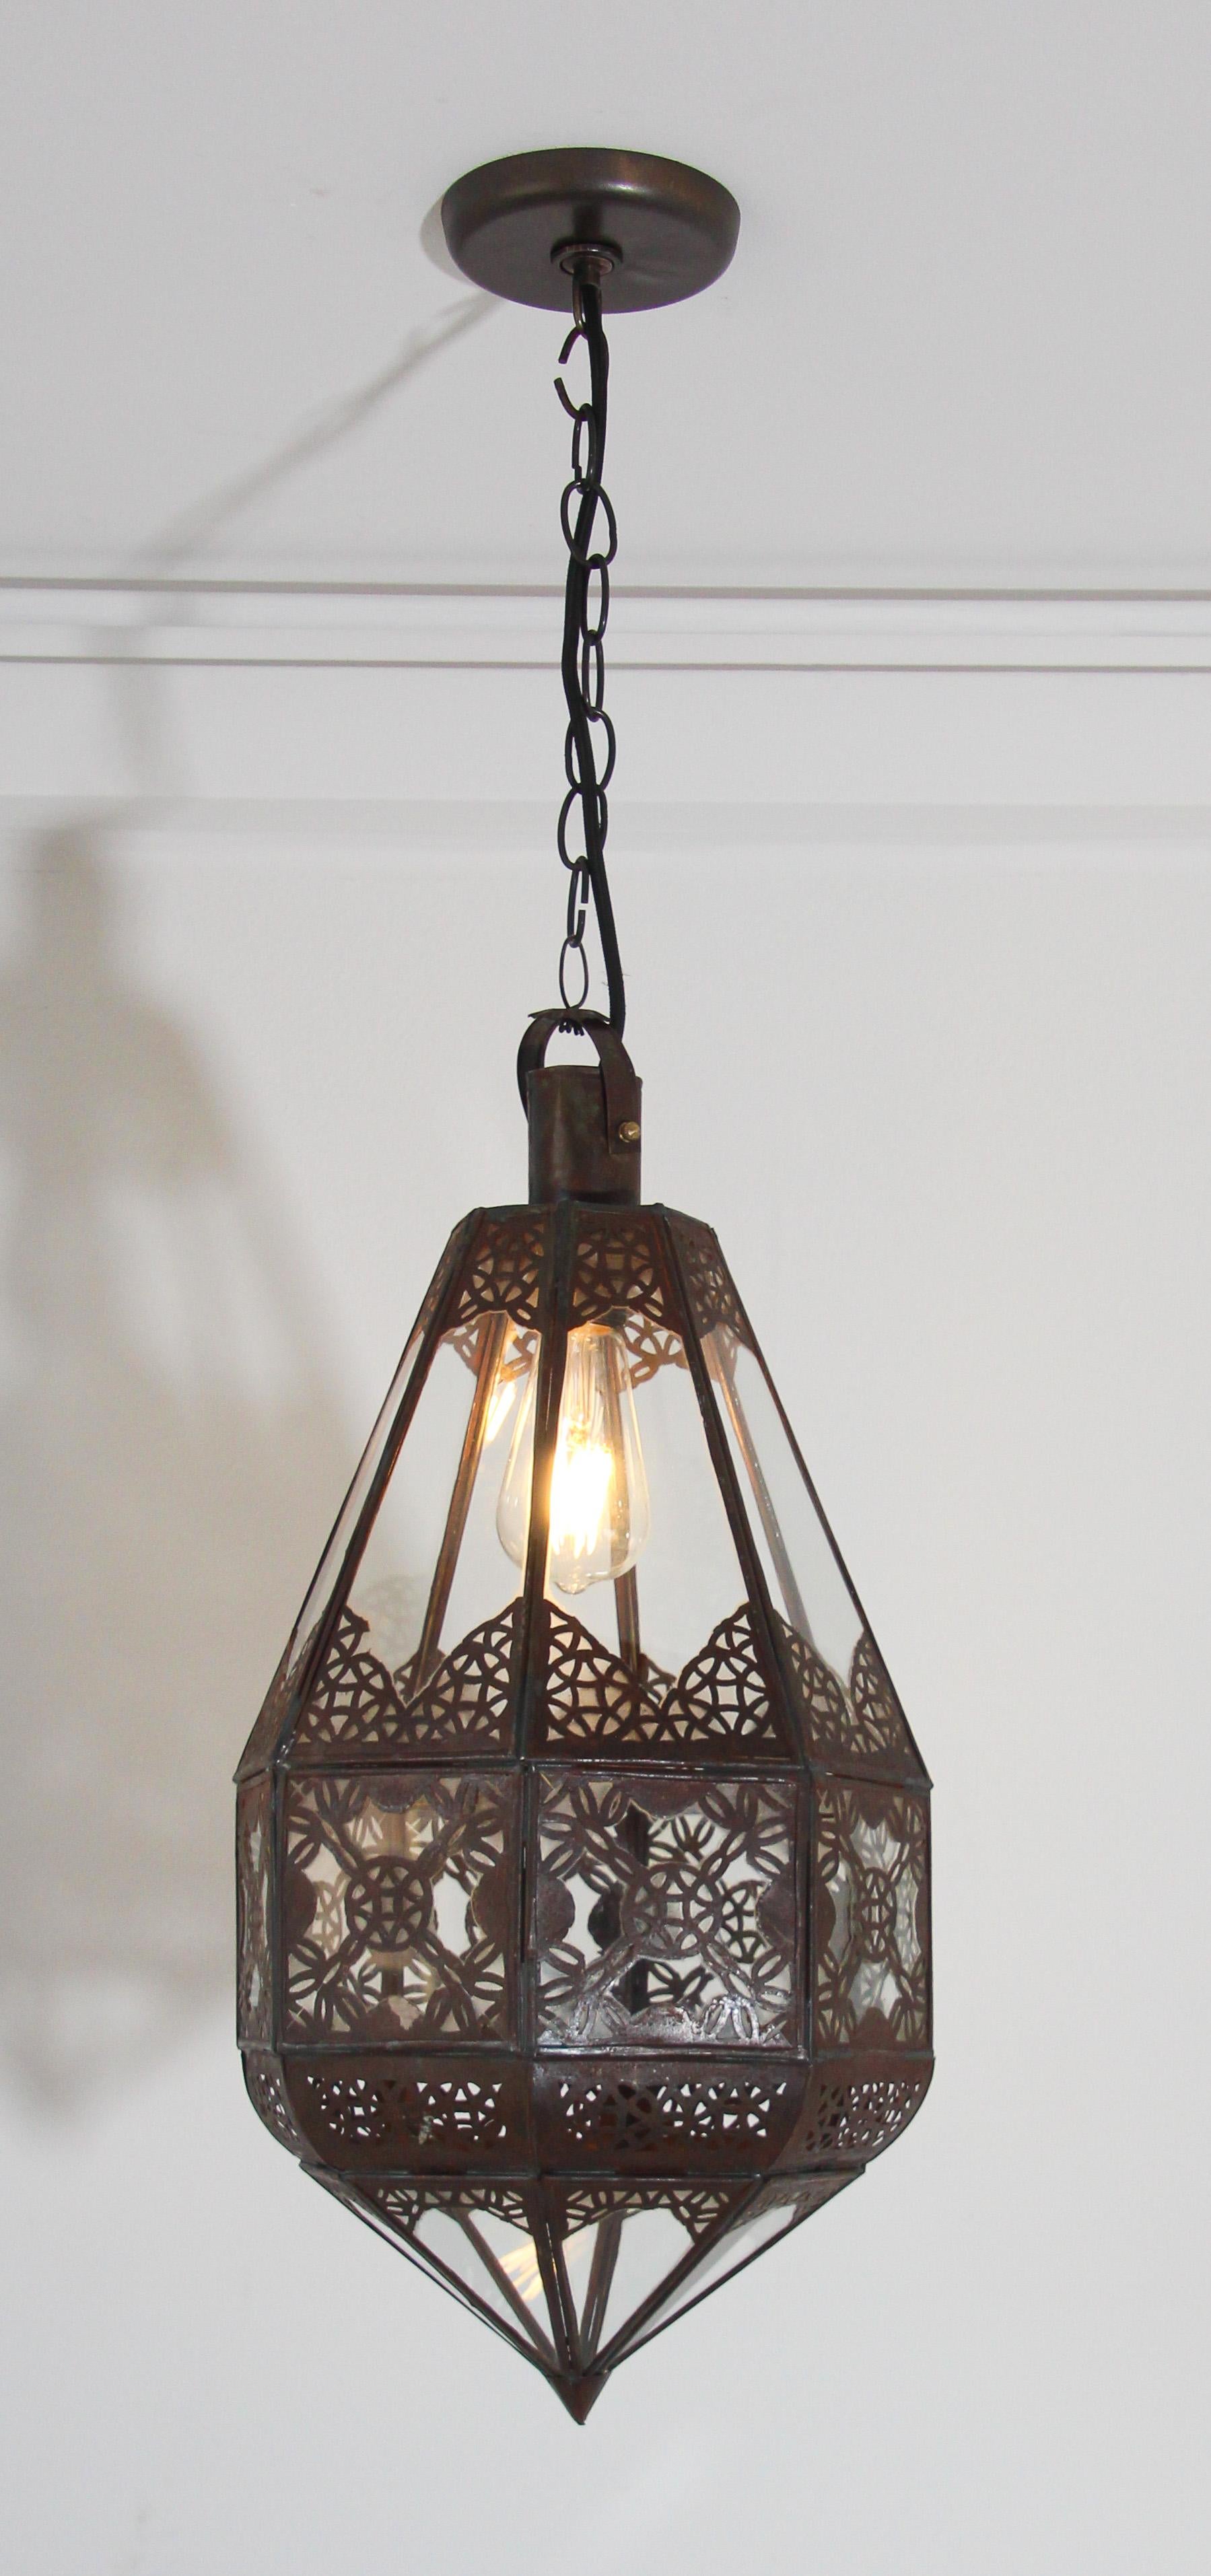 Stylish handcrafted Moroccan lantern in clear glass.
Antique bronze rust finish metal with Moorish filigree openwork design.
Moroccan lantern handmade by artisans in Marrakech, Morocco, North Africa.
Dimension: Glass and metal lantern 24 in. height